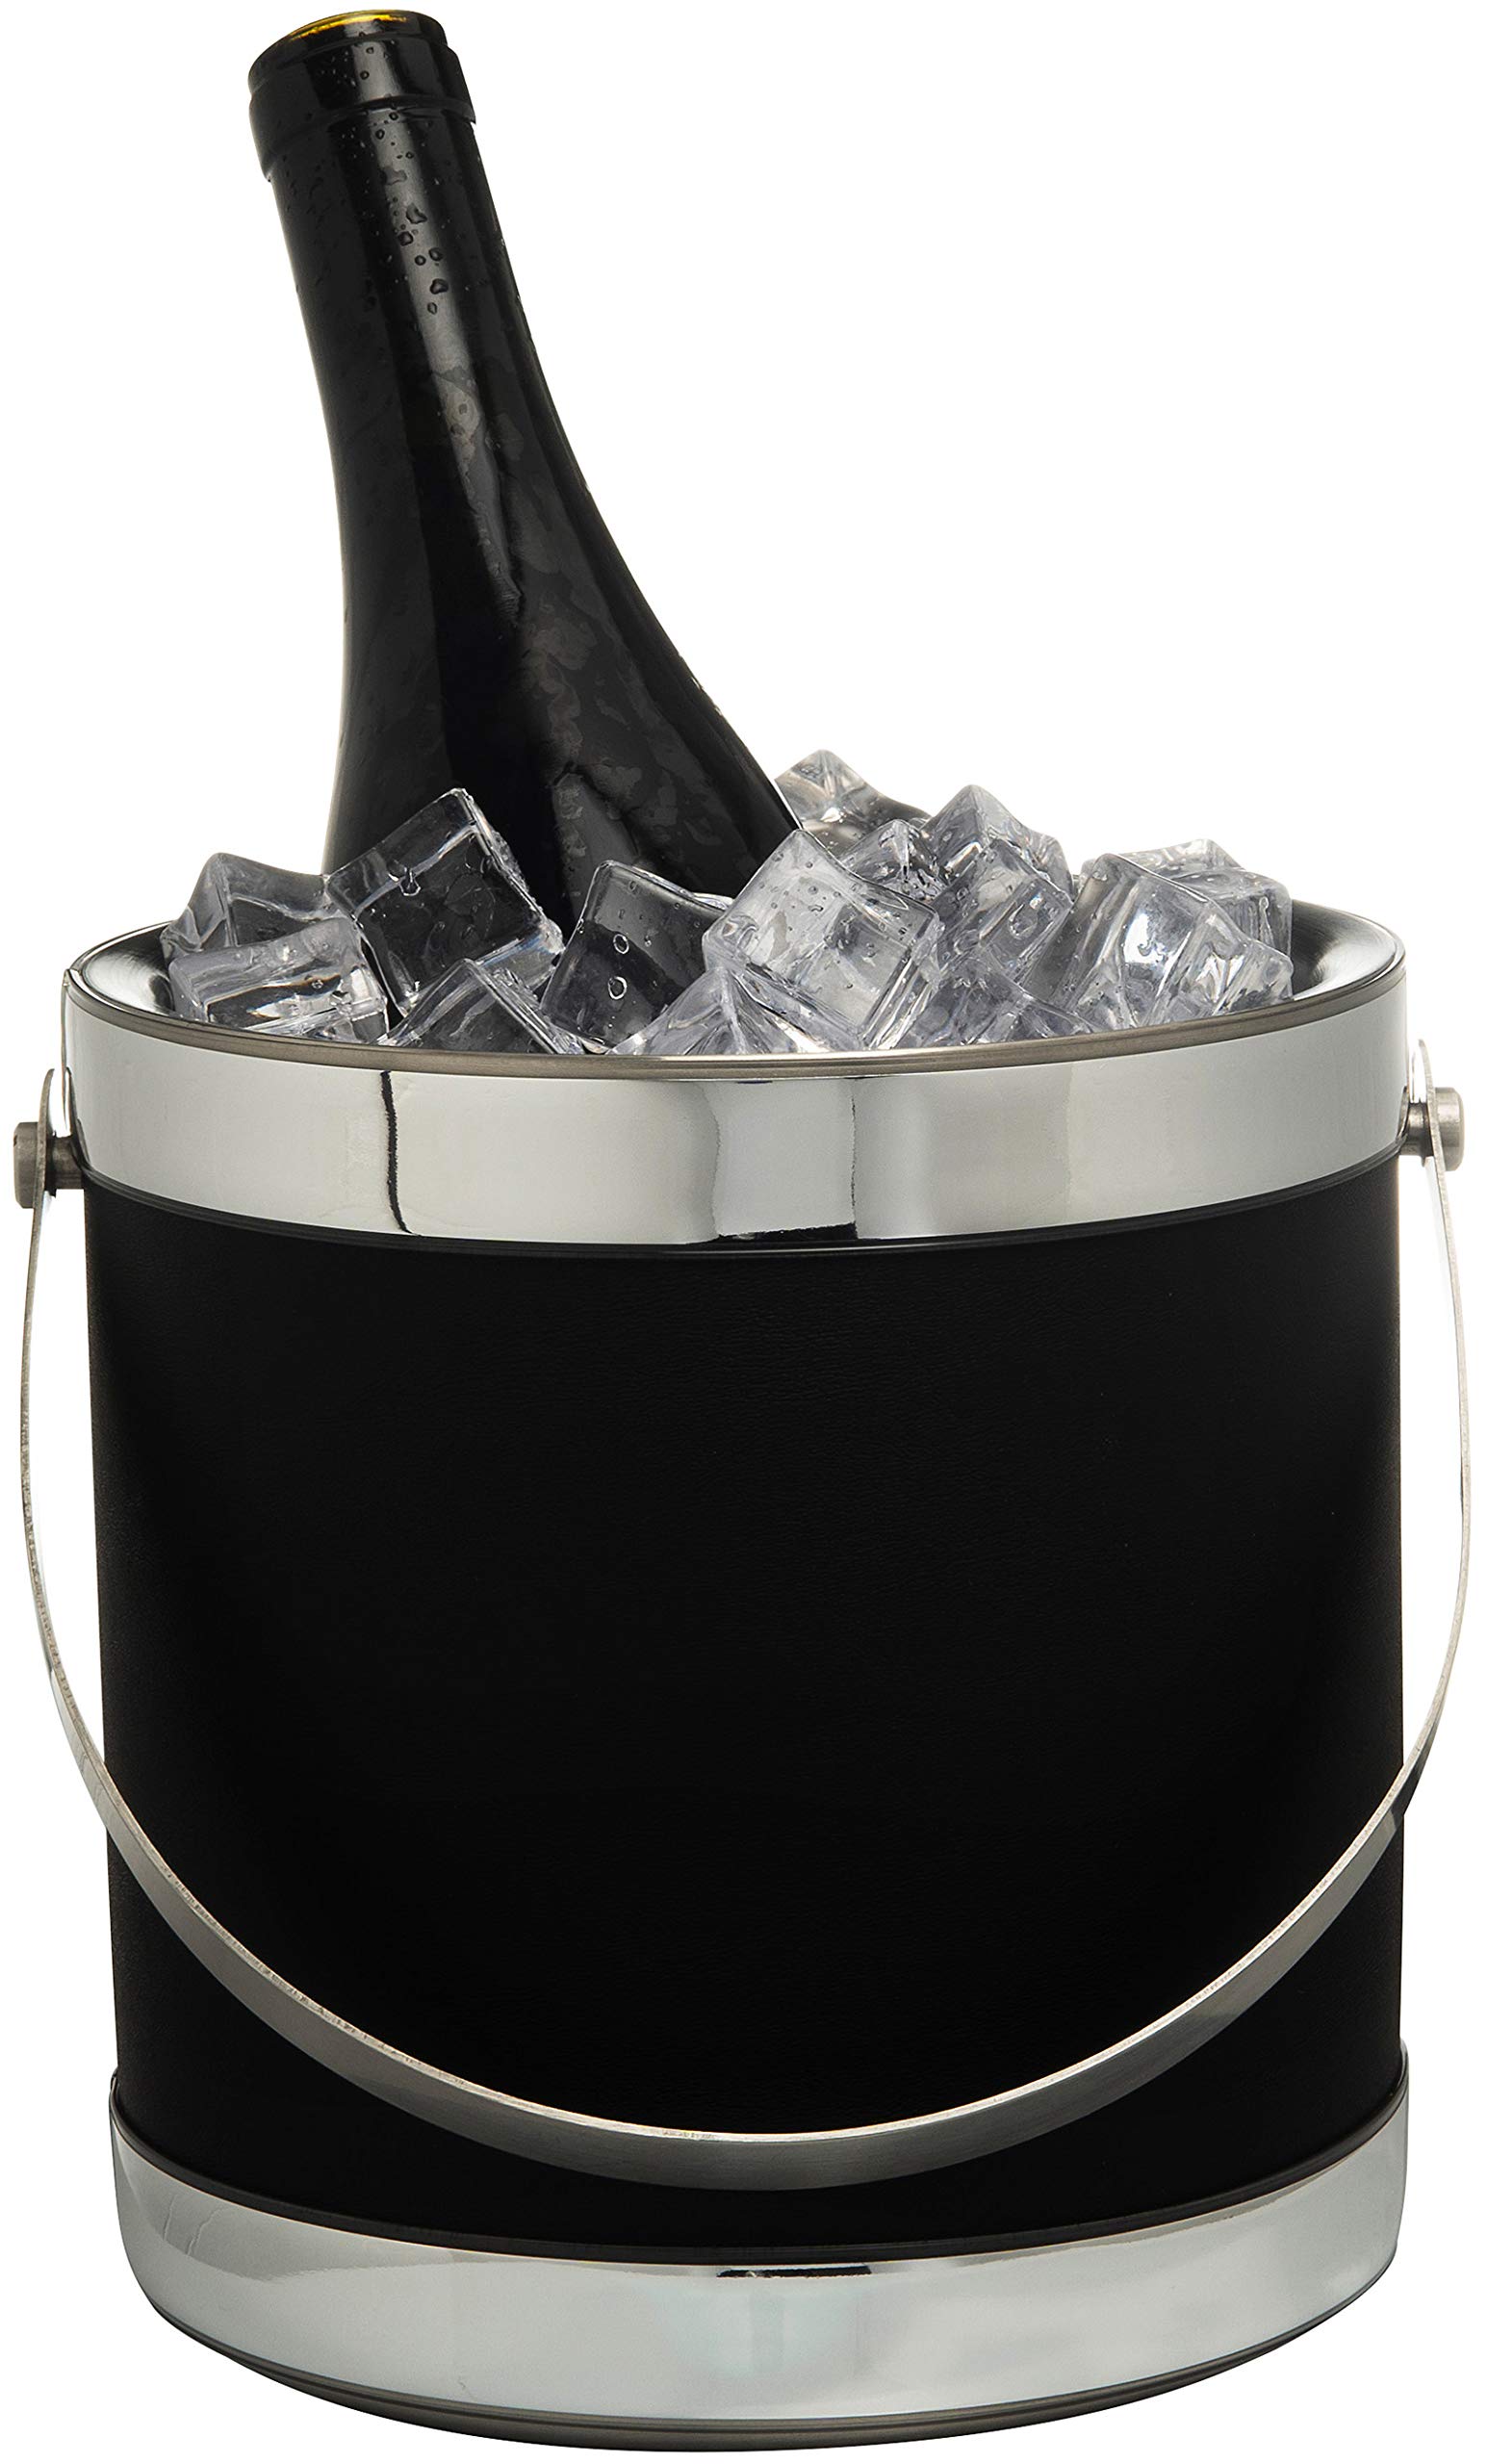 Hand Made In USA Black Wrap Double Walled 3-Quart Insulated Ice Bucket With Ice Tongs (Leatherette Collection)